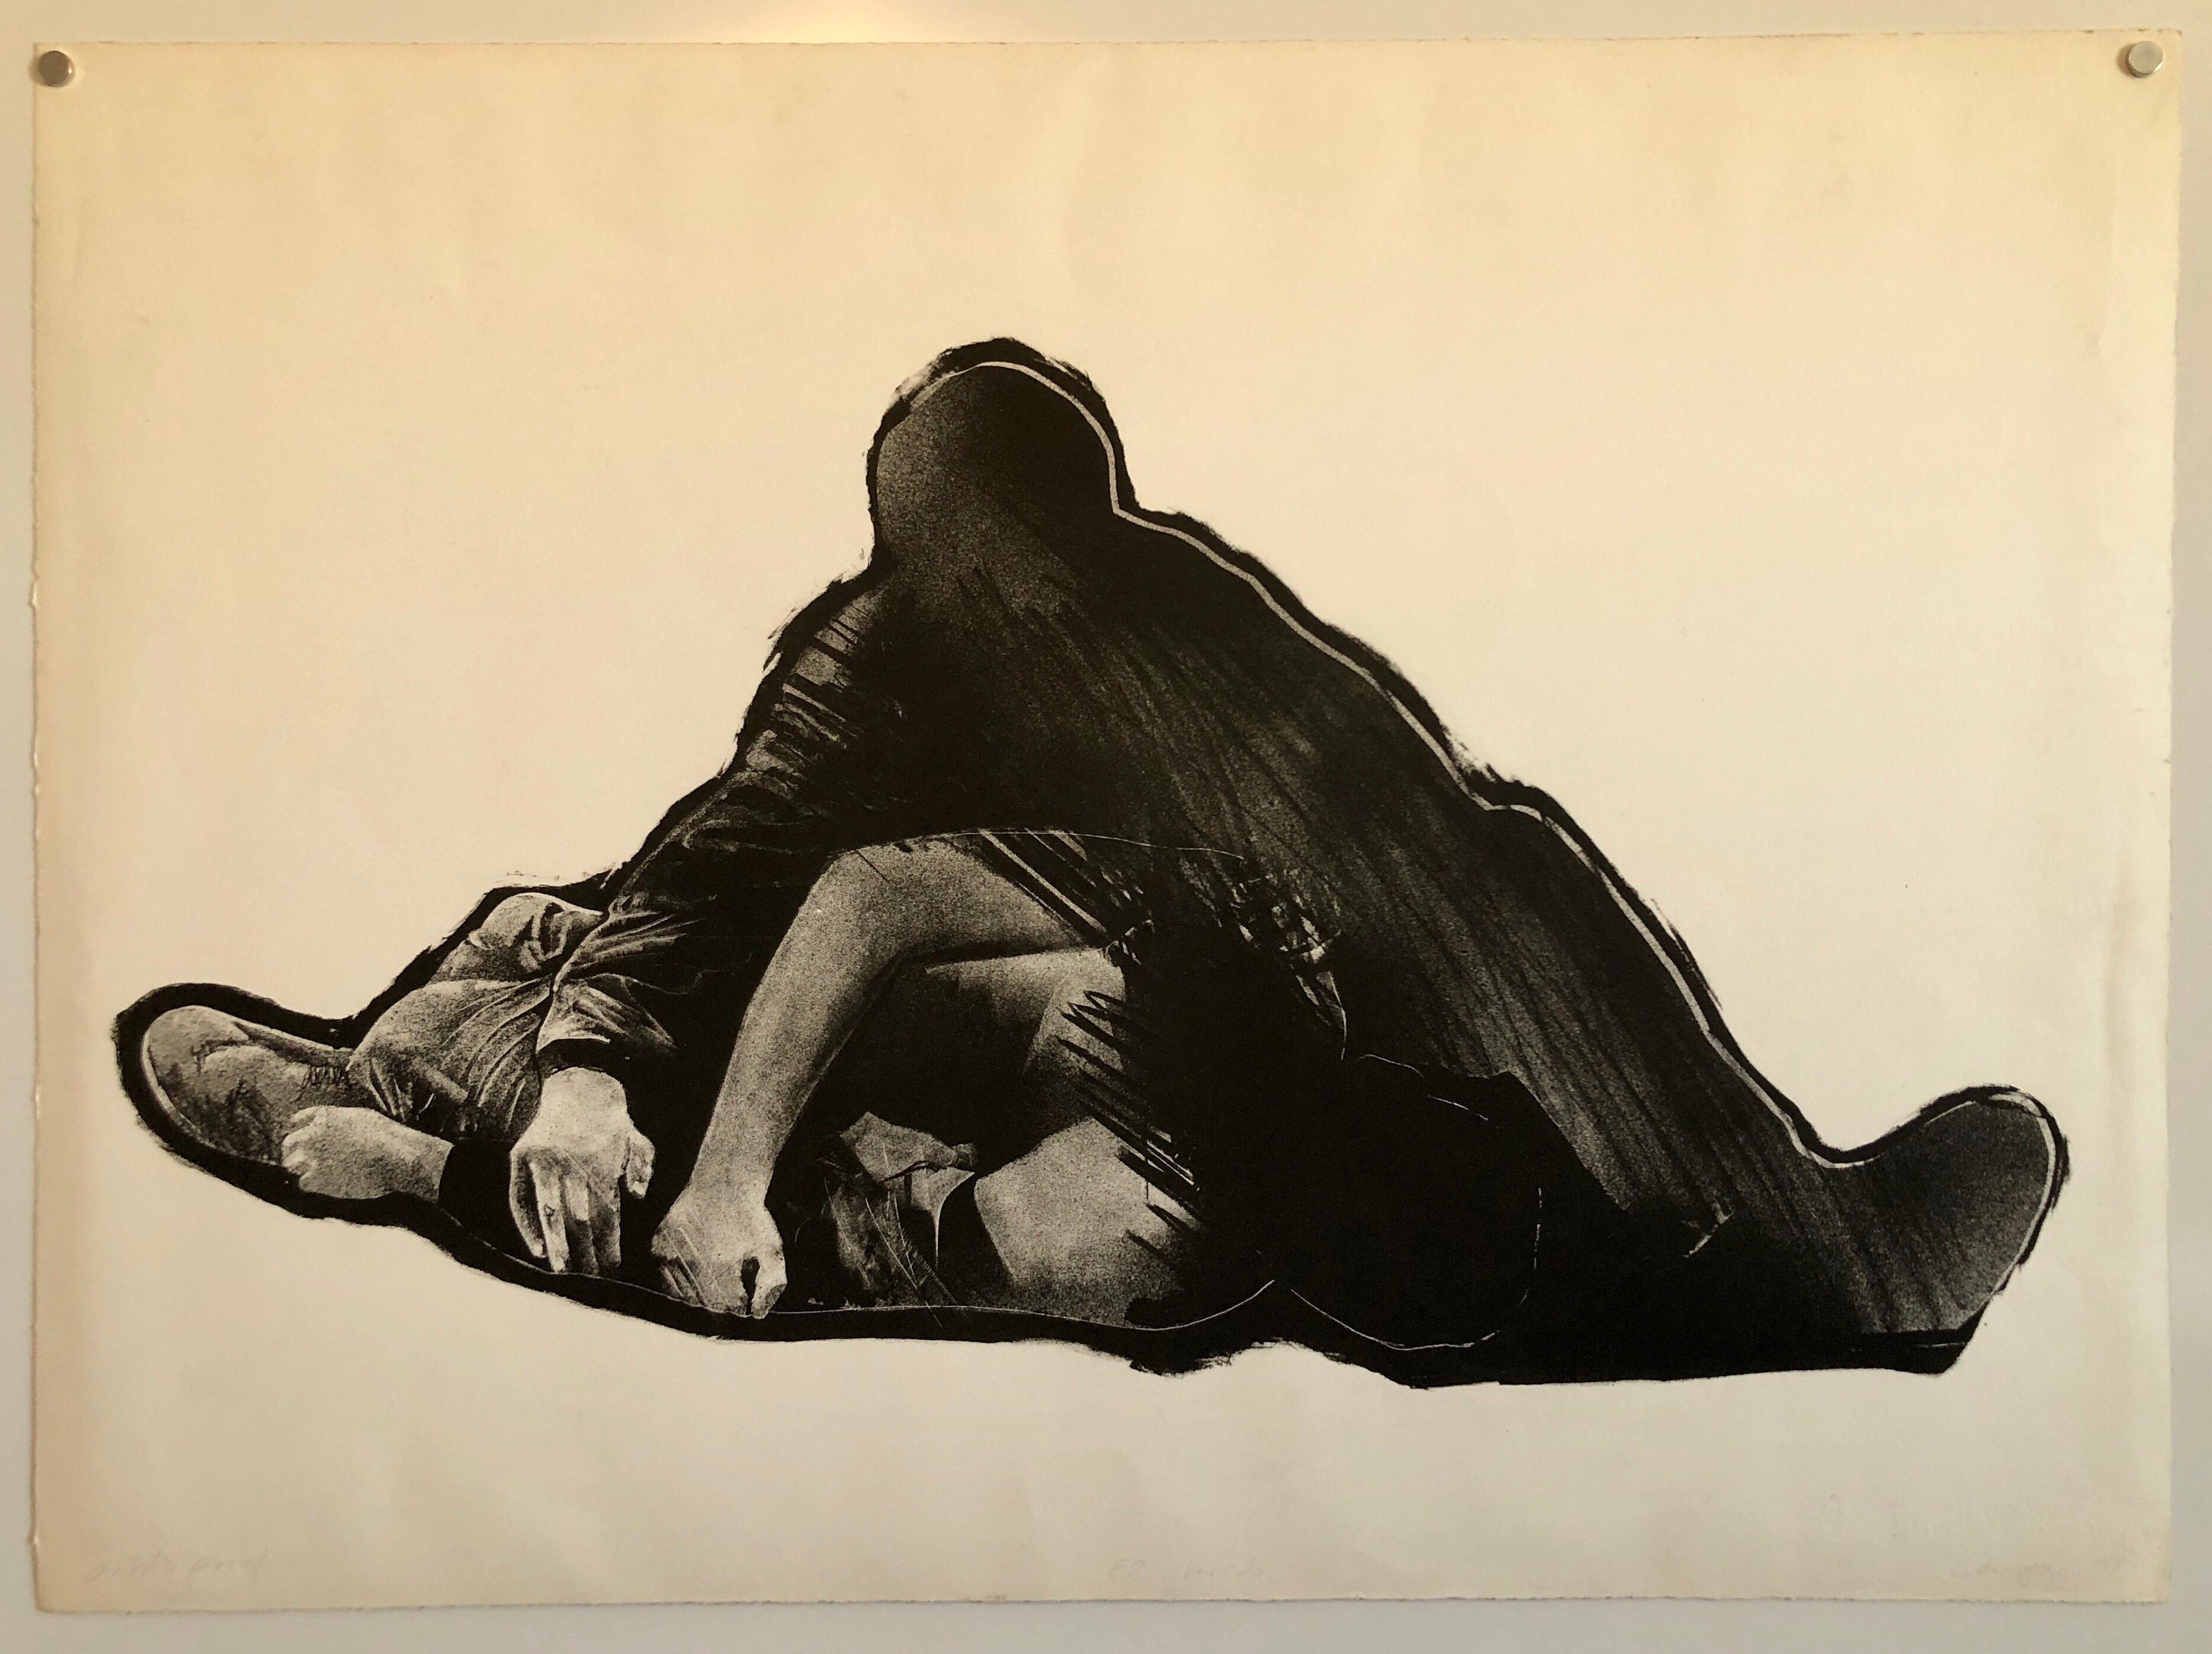 

The Wounded One (El Herido) from Violence (La Violencia) 1969 signed, dated and titled in pencil
Dimensions: sheet: 22 1/16 x 30 1/16